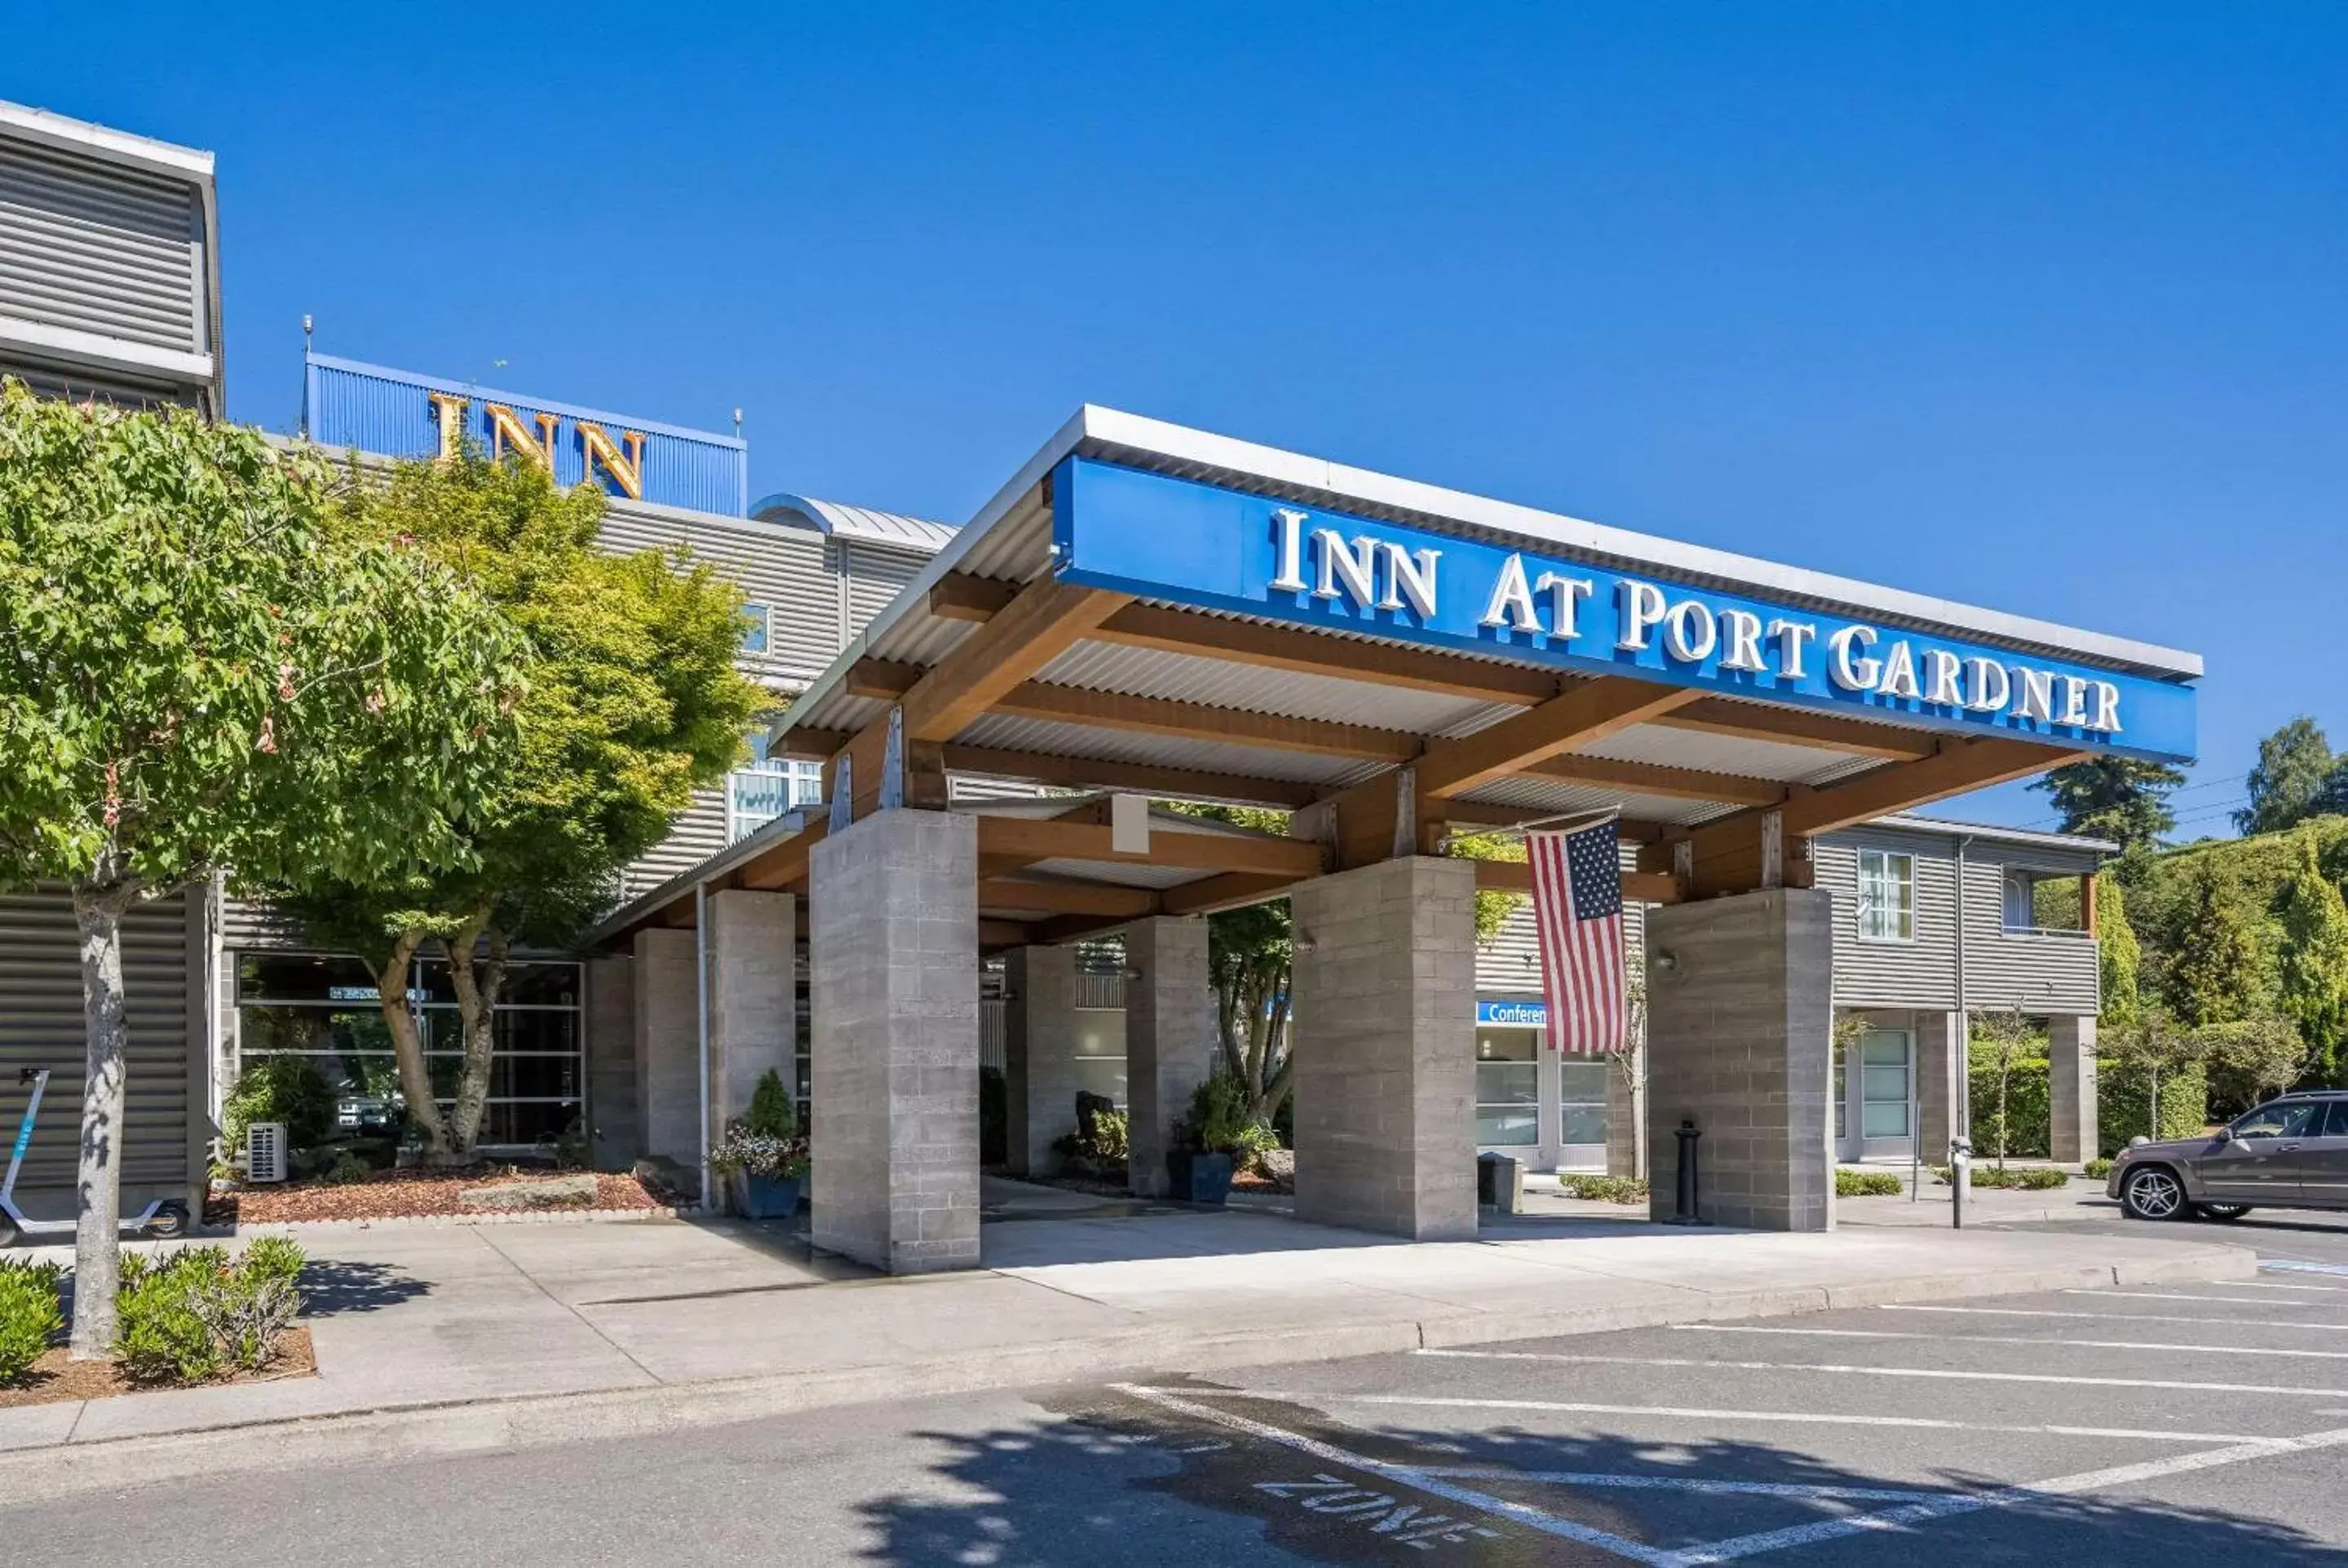 Property building in Inn at Port Gardner-Everett Waterfront, Ascend Hotel Collection